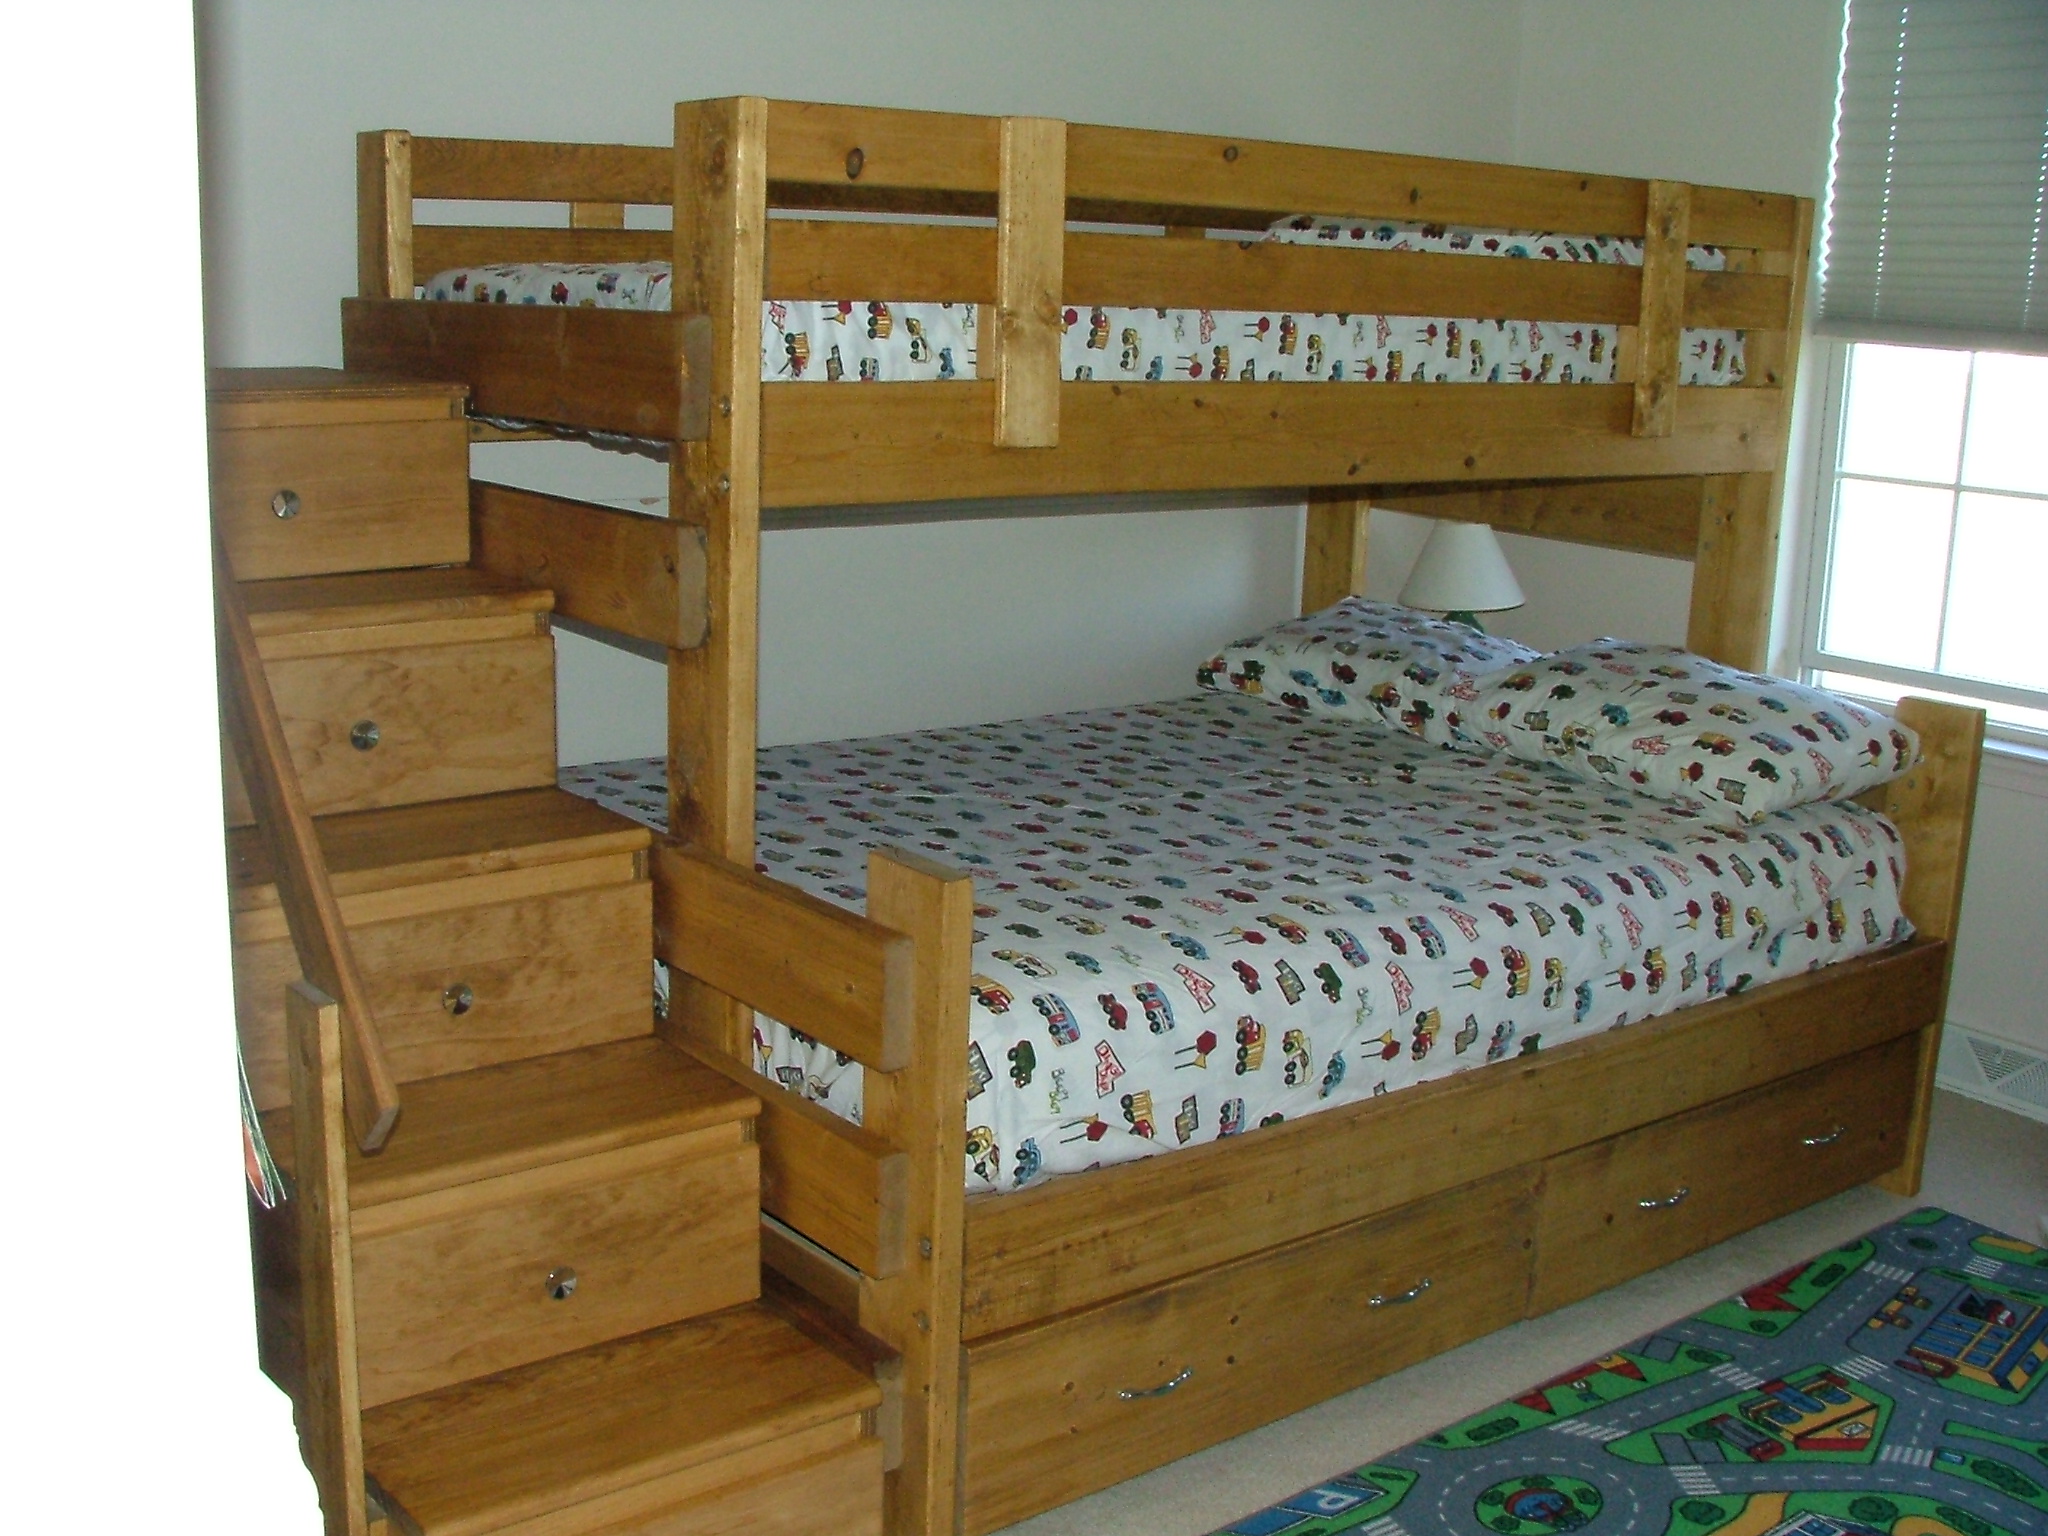 Full Bed Furniture Woodworking Plans, Twin Over Full Bunk Bed Plans With Stairs